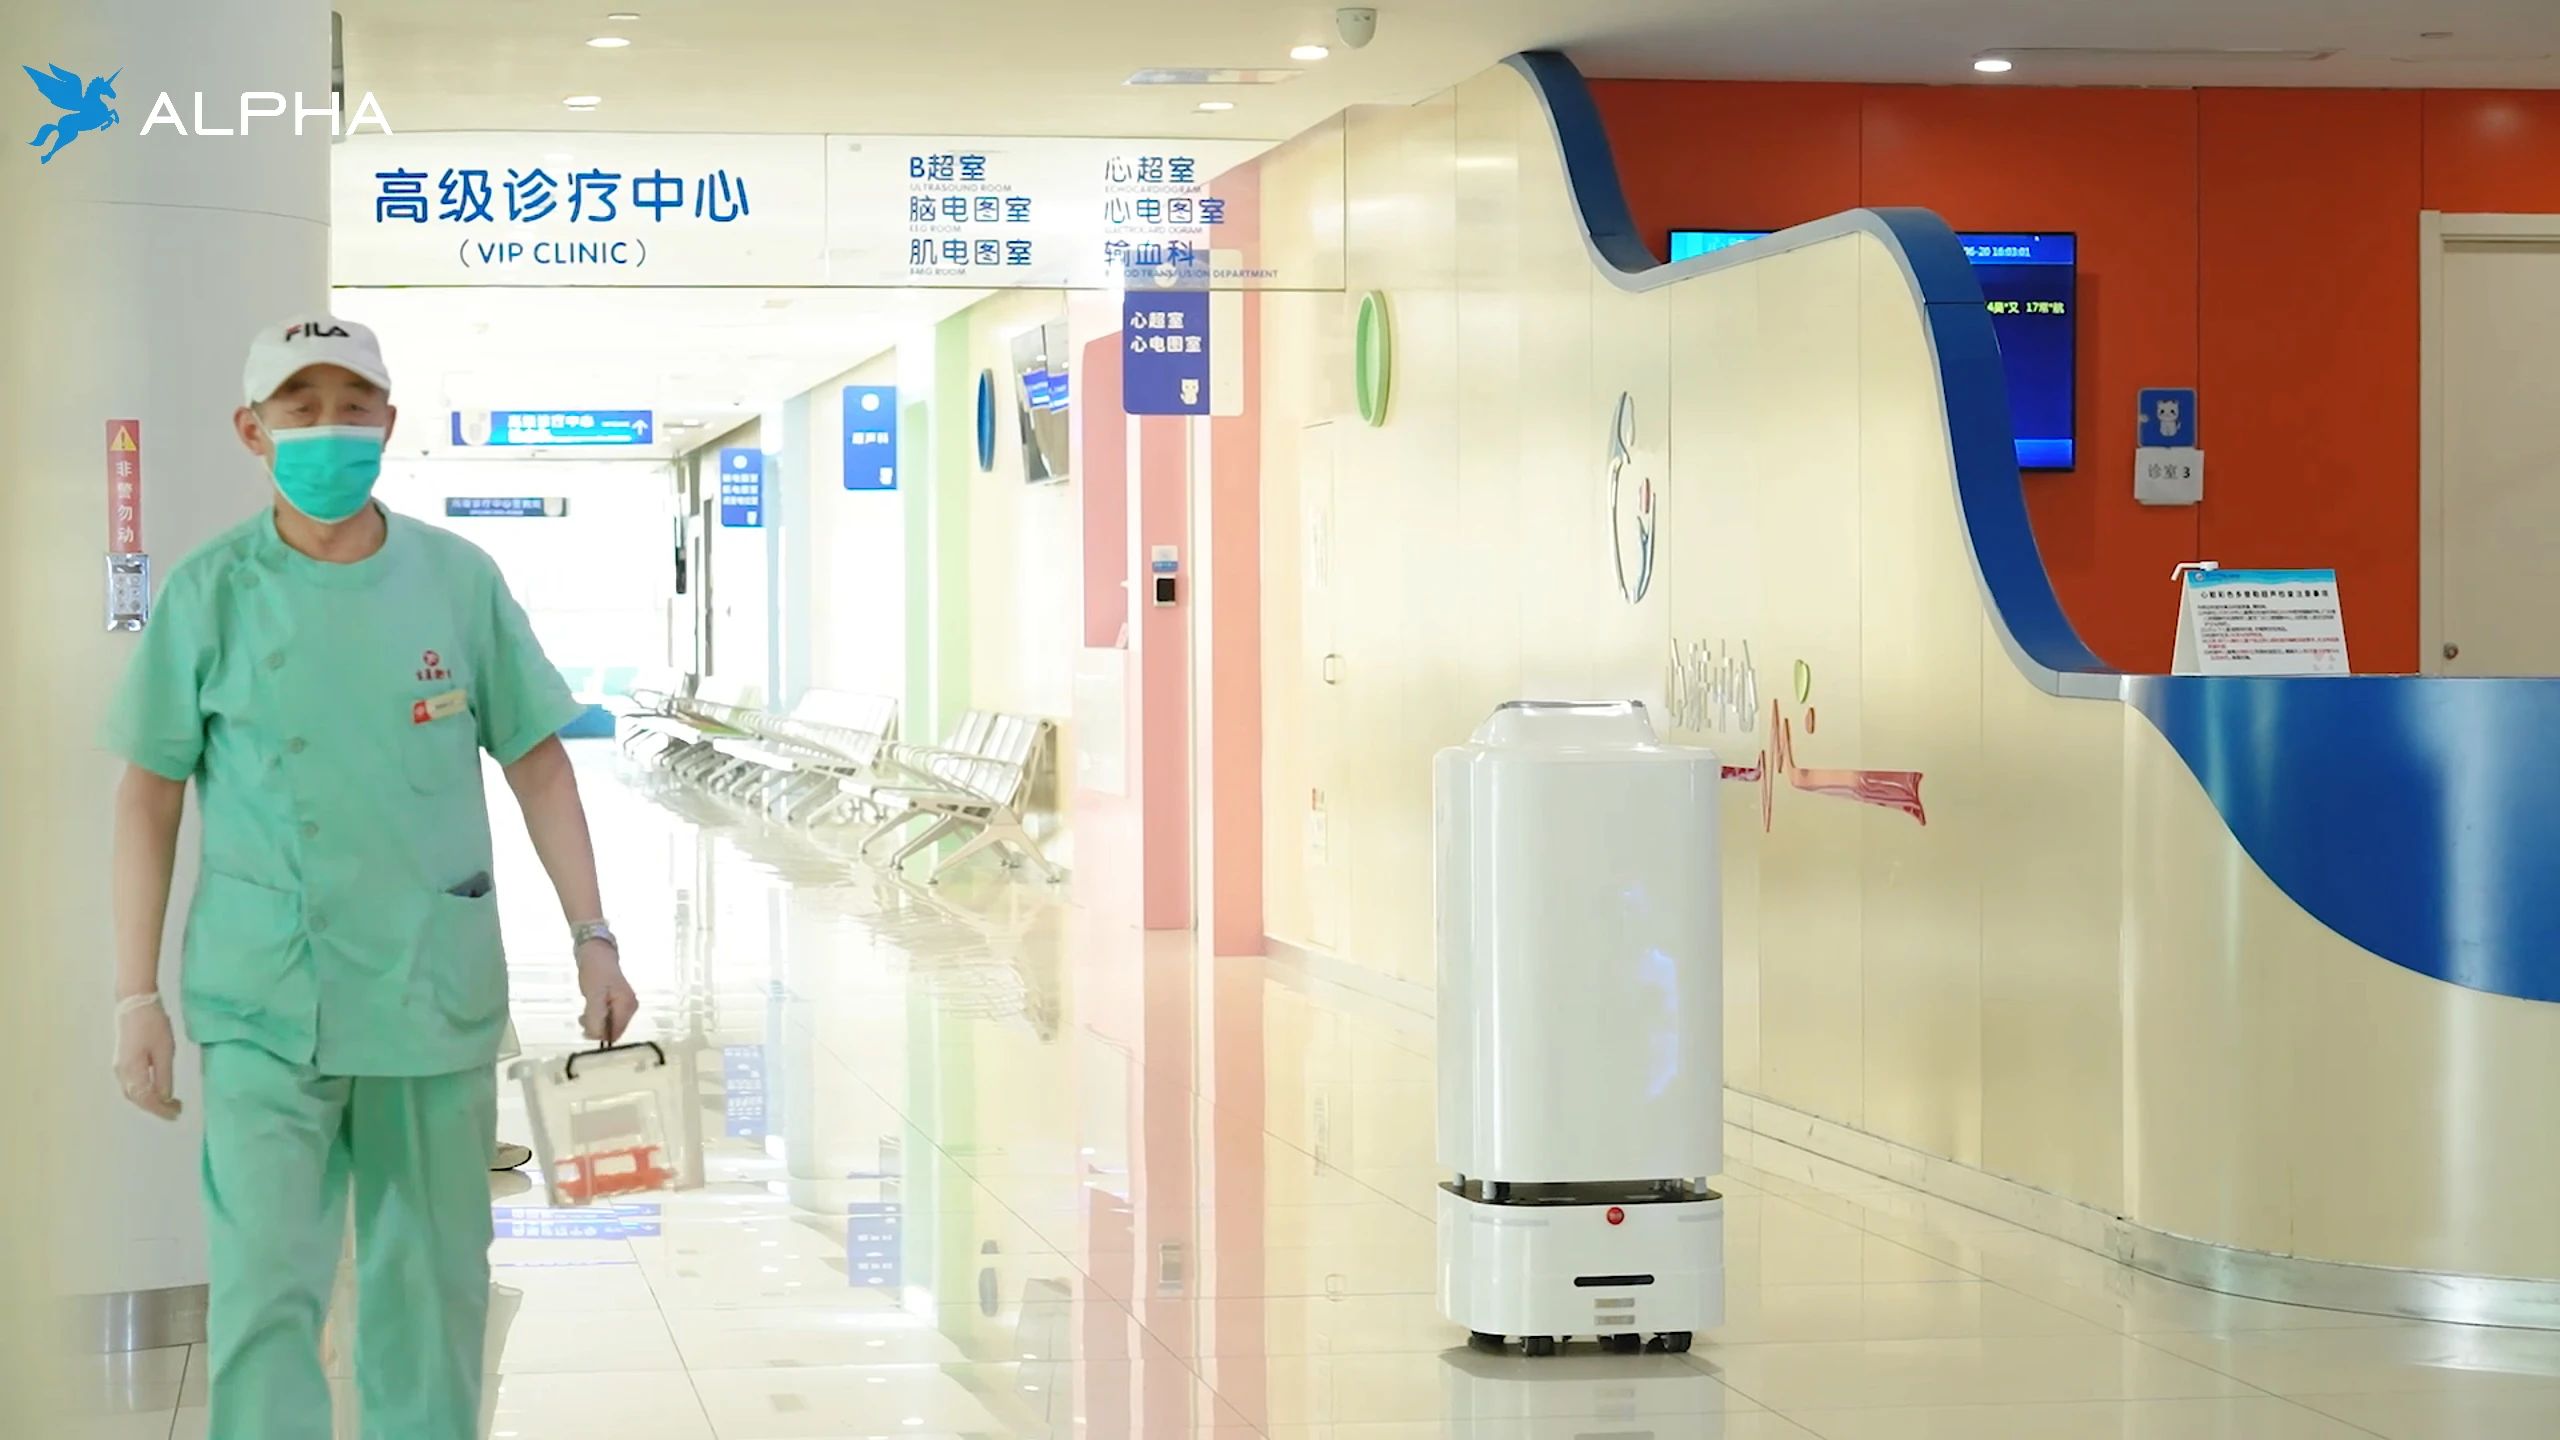 Scud delivery robot: the new “guardian” of Suzhou University Affiliated Children’s Hospital